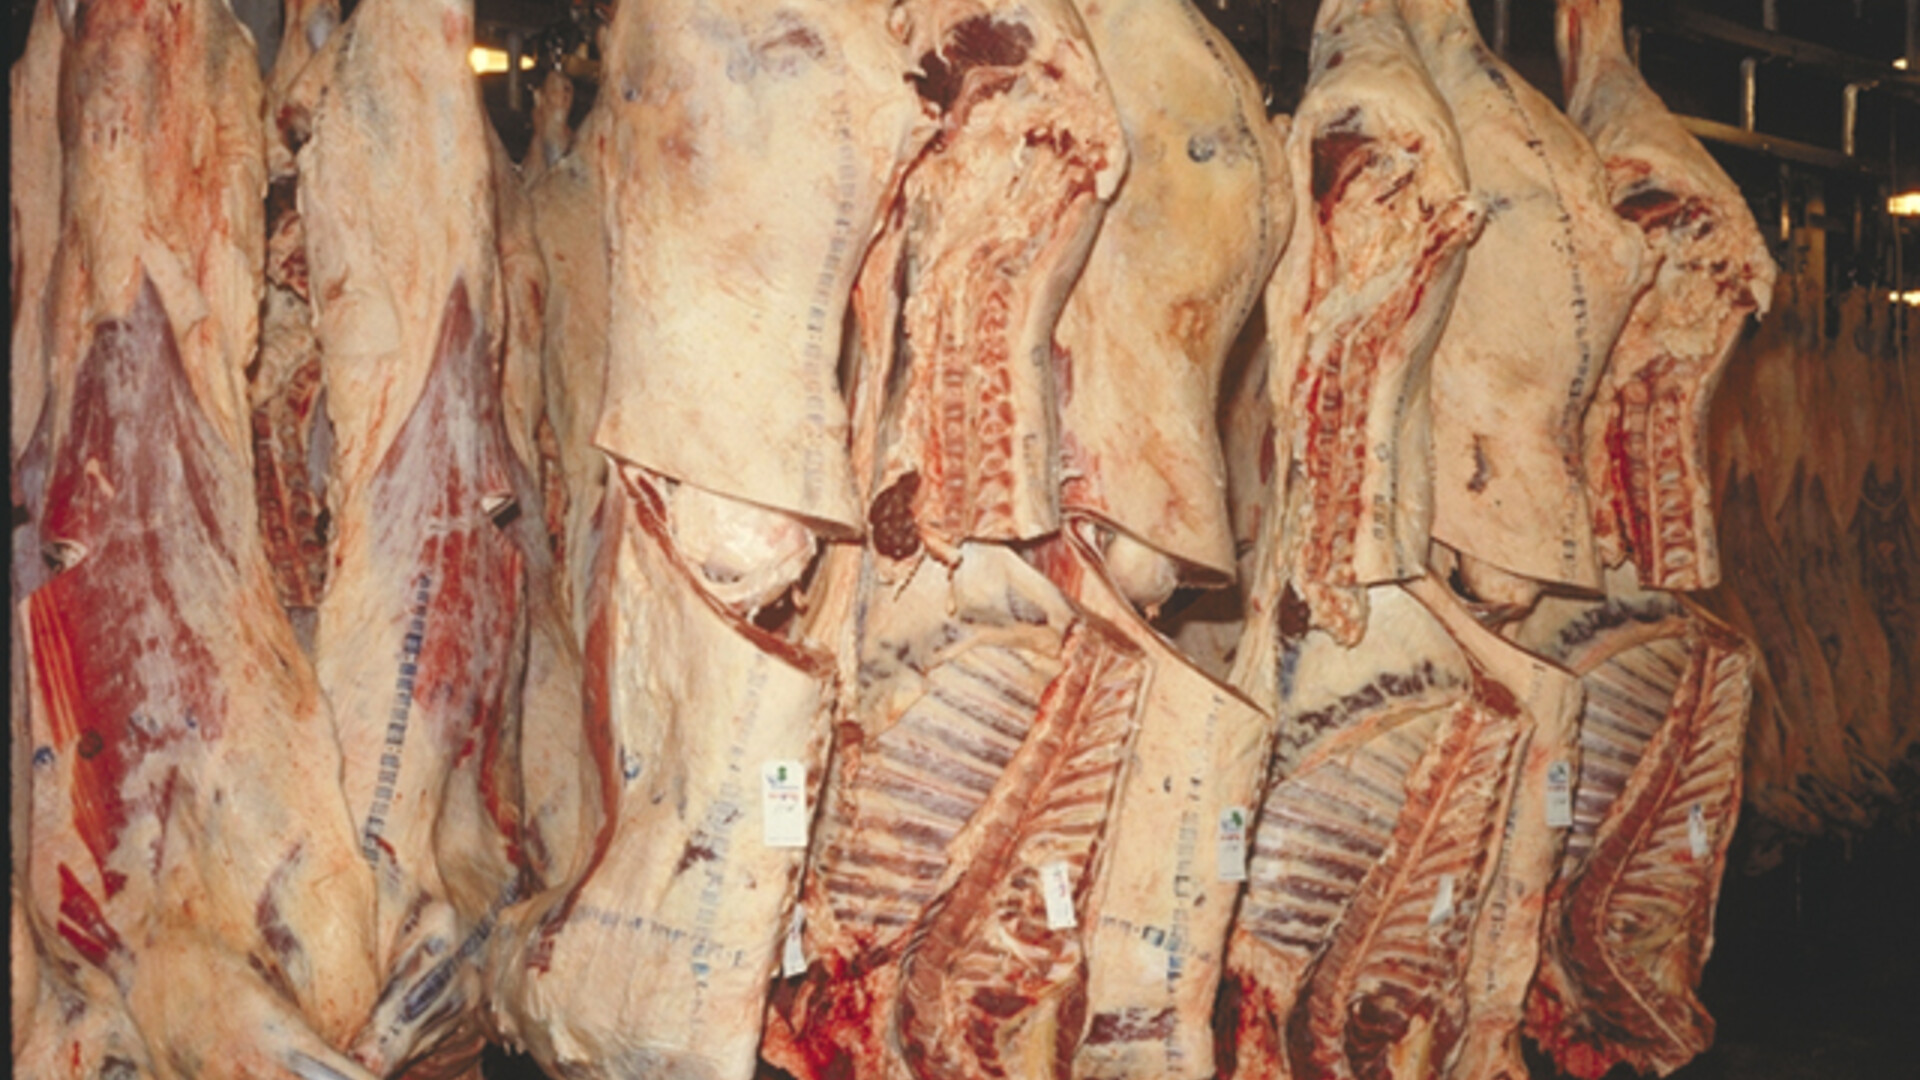 An Exception in Beef Demand